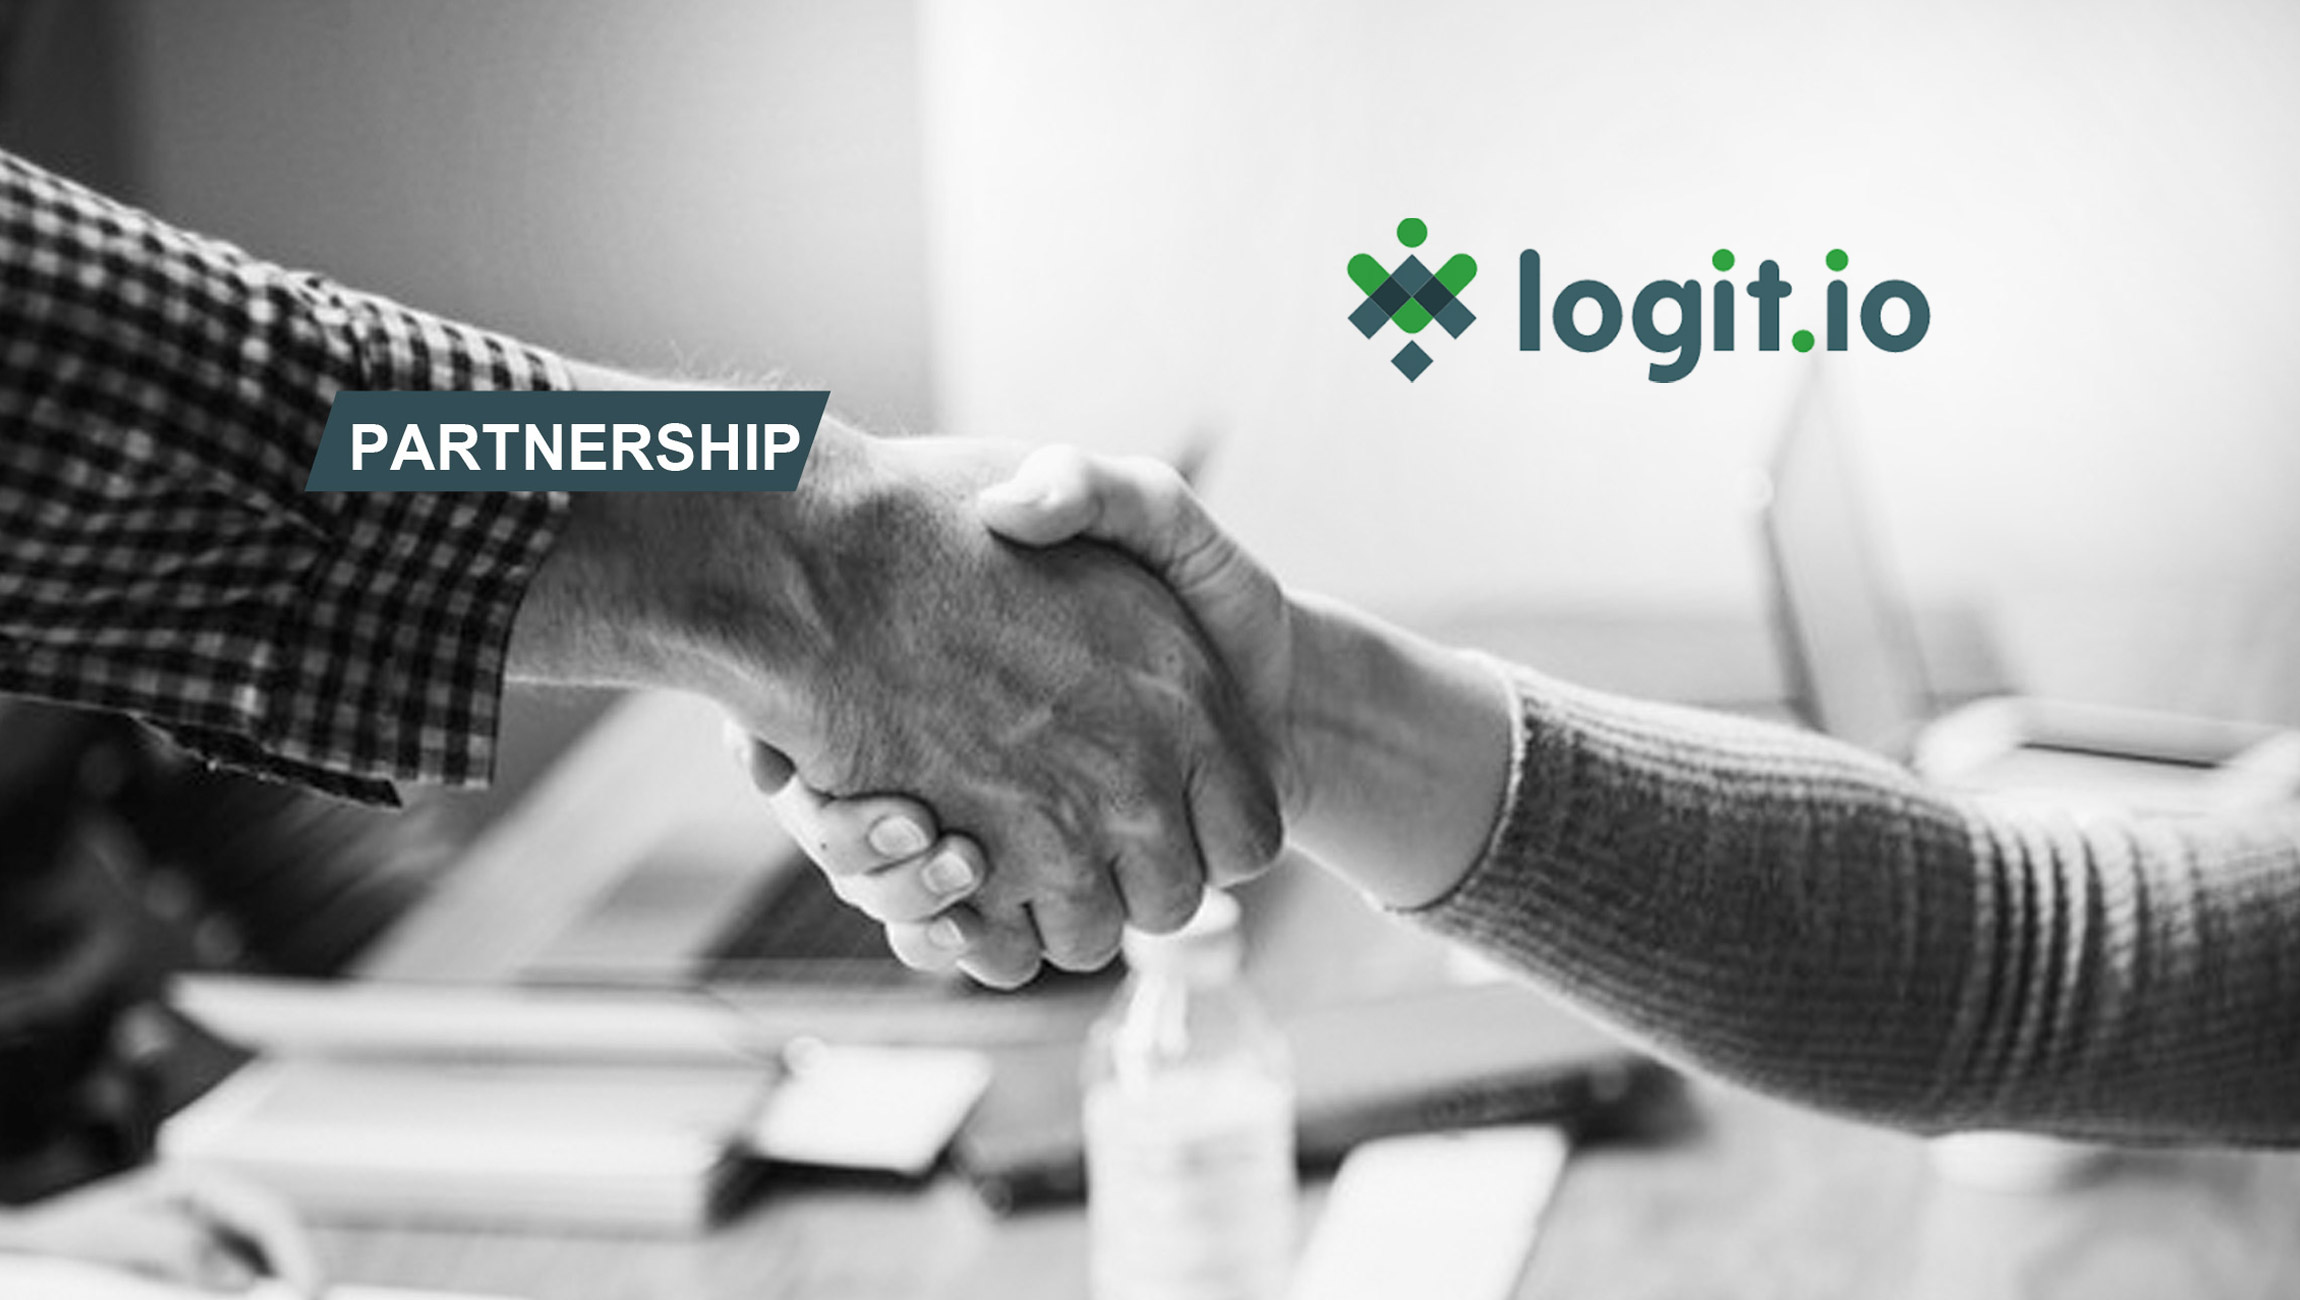 Logit.io-Ramp-Up-Channel-Efforts-With-The-Launch-Of-New-Global-Partner-Program